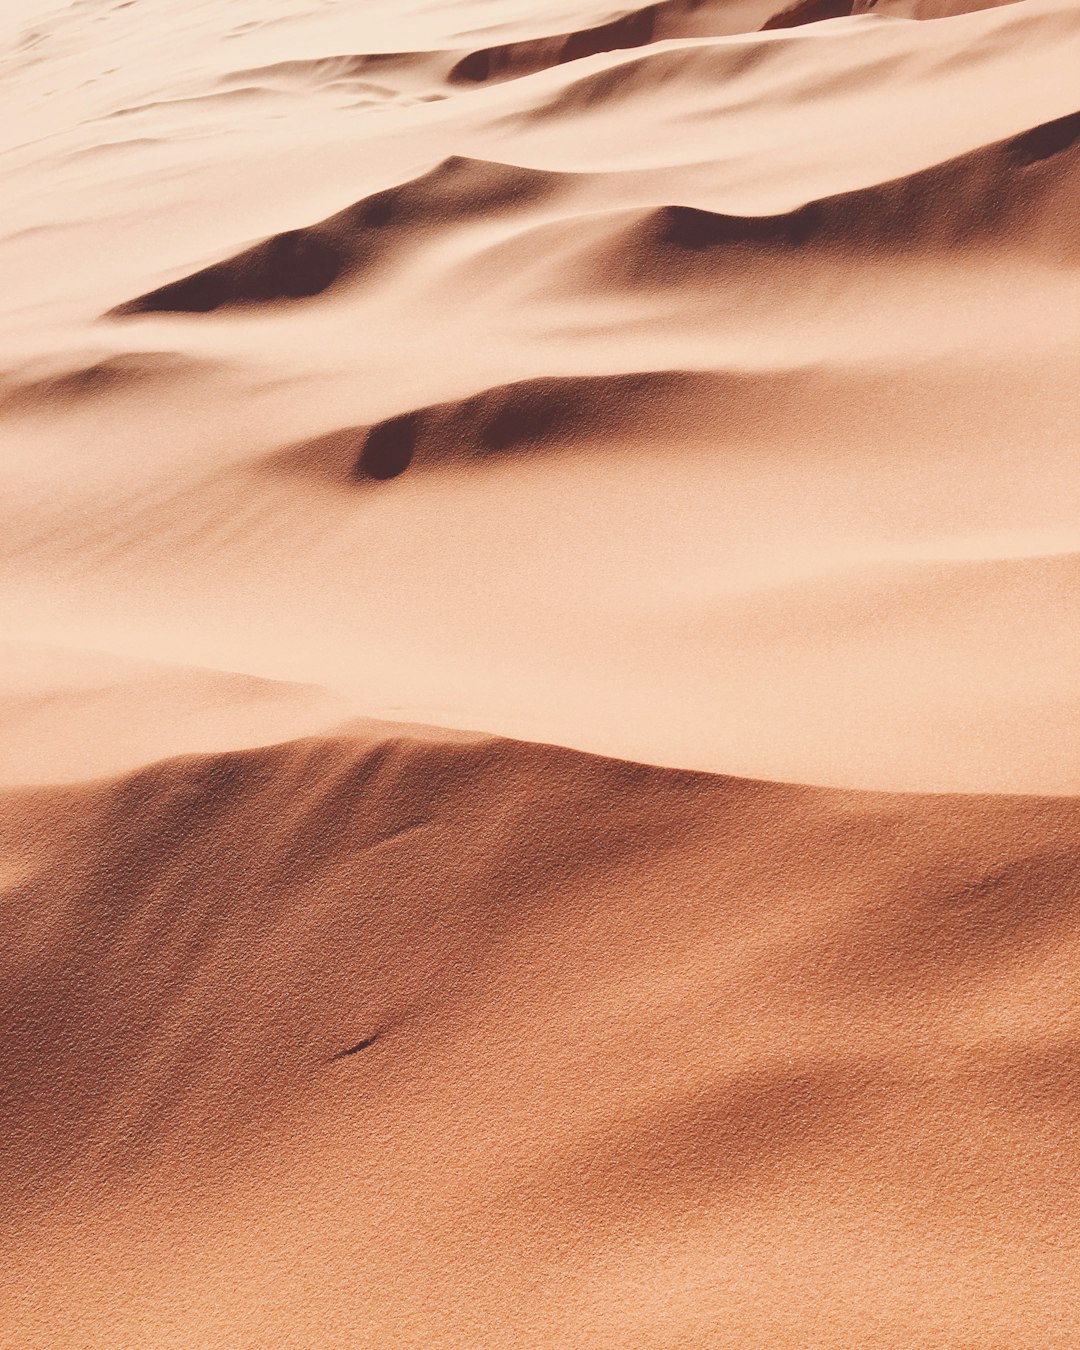 This is a cropped shot of some sand at the Coral Pink Sand Dunes State Park in Utah. However, it could look like large sand dunes from an aerial view also. Whether near or far, I love the softness of the texture and the crisp lines that could be changed instantly by a slight breeze. It’s a magical, playful, pink place.